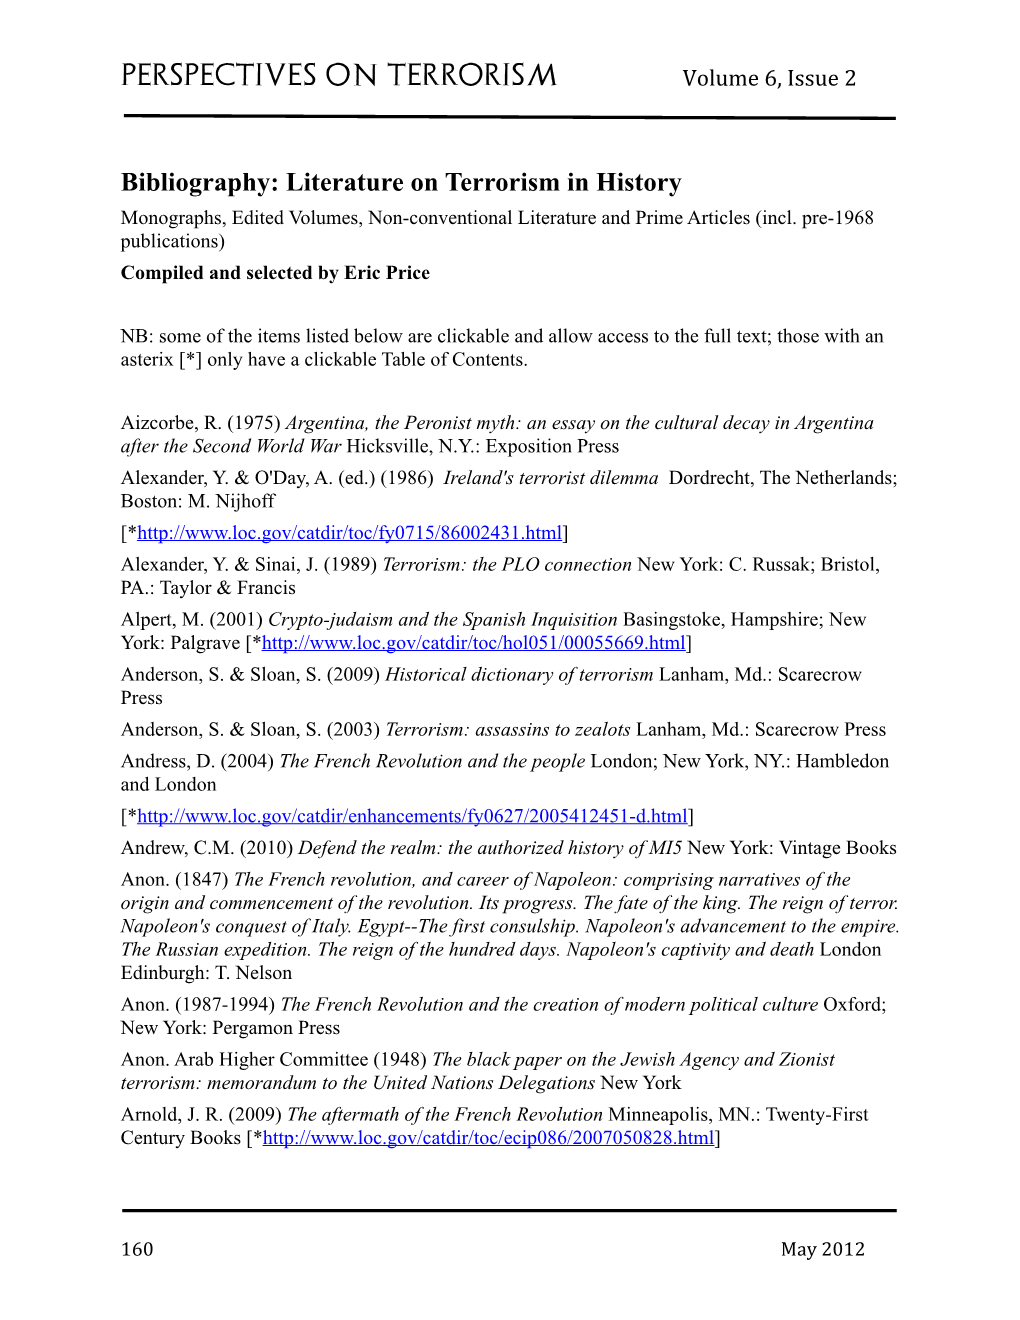 Bibliography: Literature on Terrorism in History Monographs, Edited Volumes, Non-Conventional Literature and Prime Articles (Incl